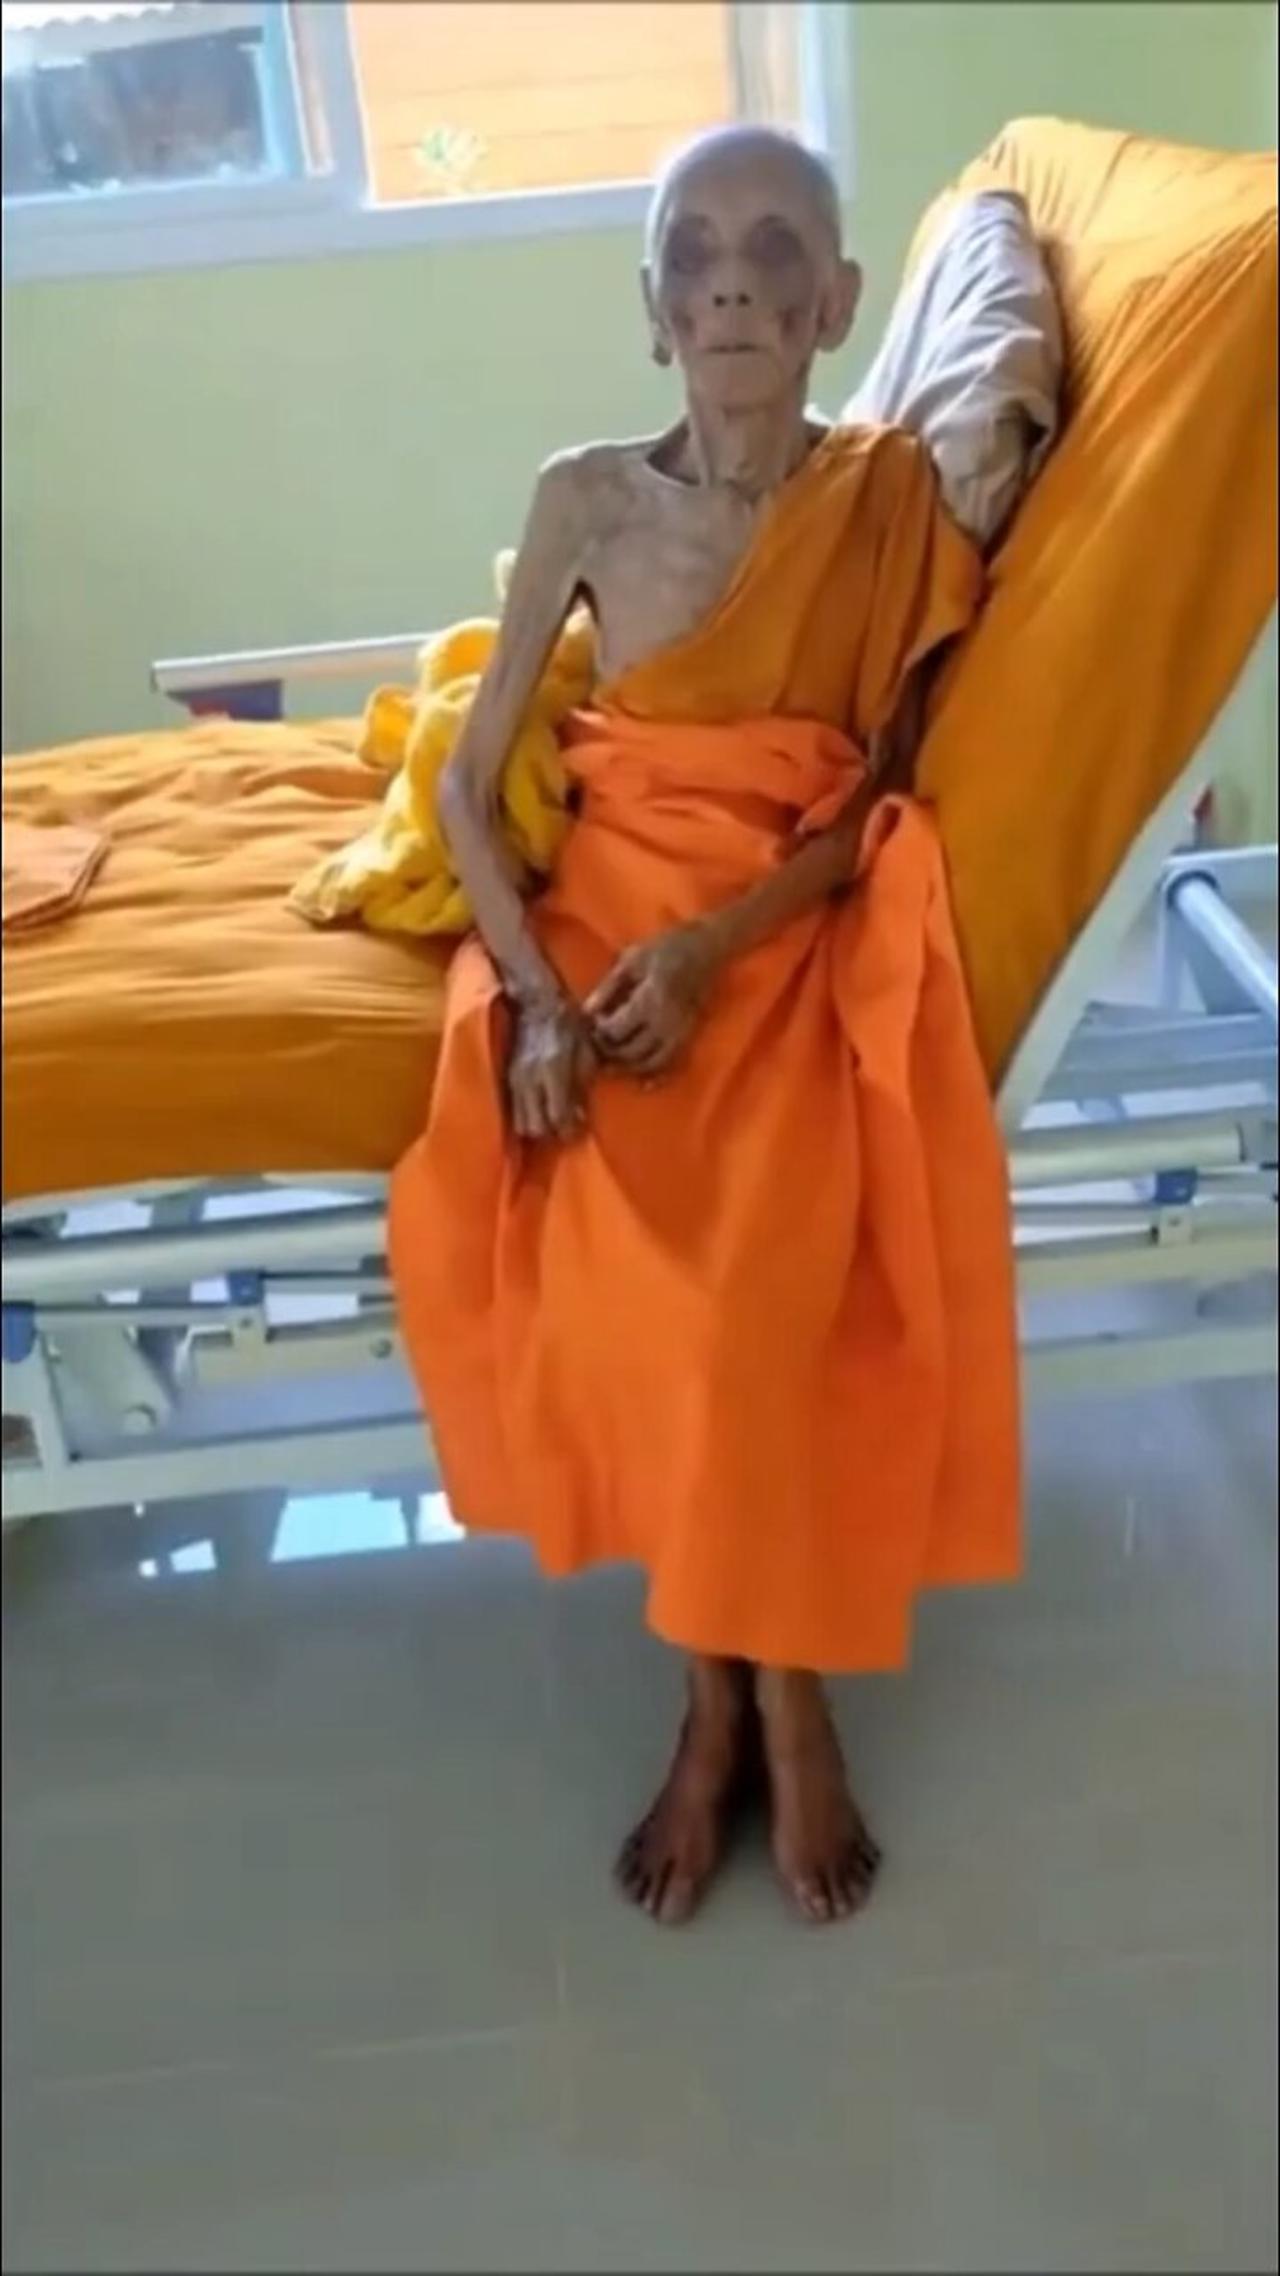 "Unbelievable! Oldest Human Alive at 399 Years Old Caught on Viral Video! // Hottest News"